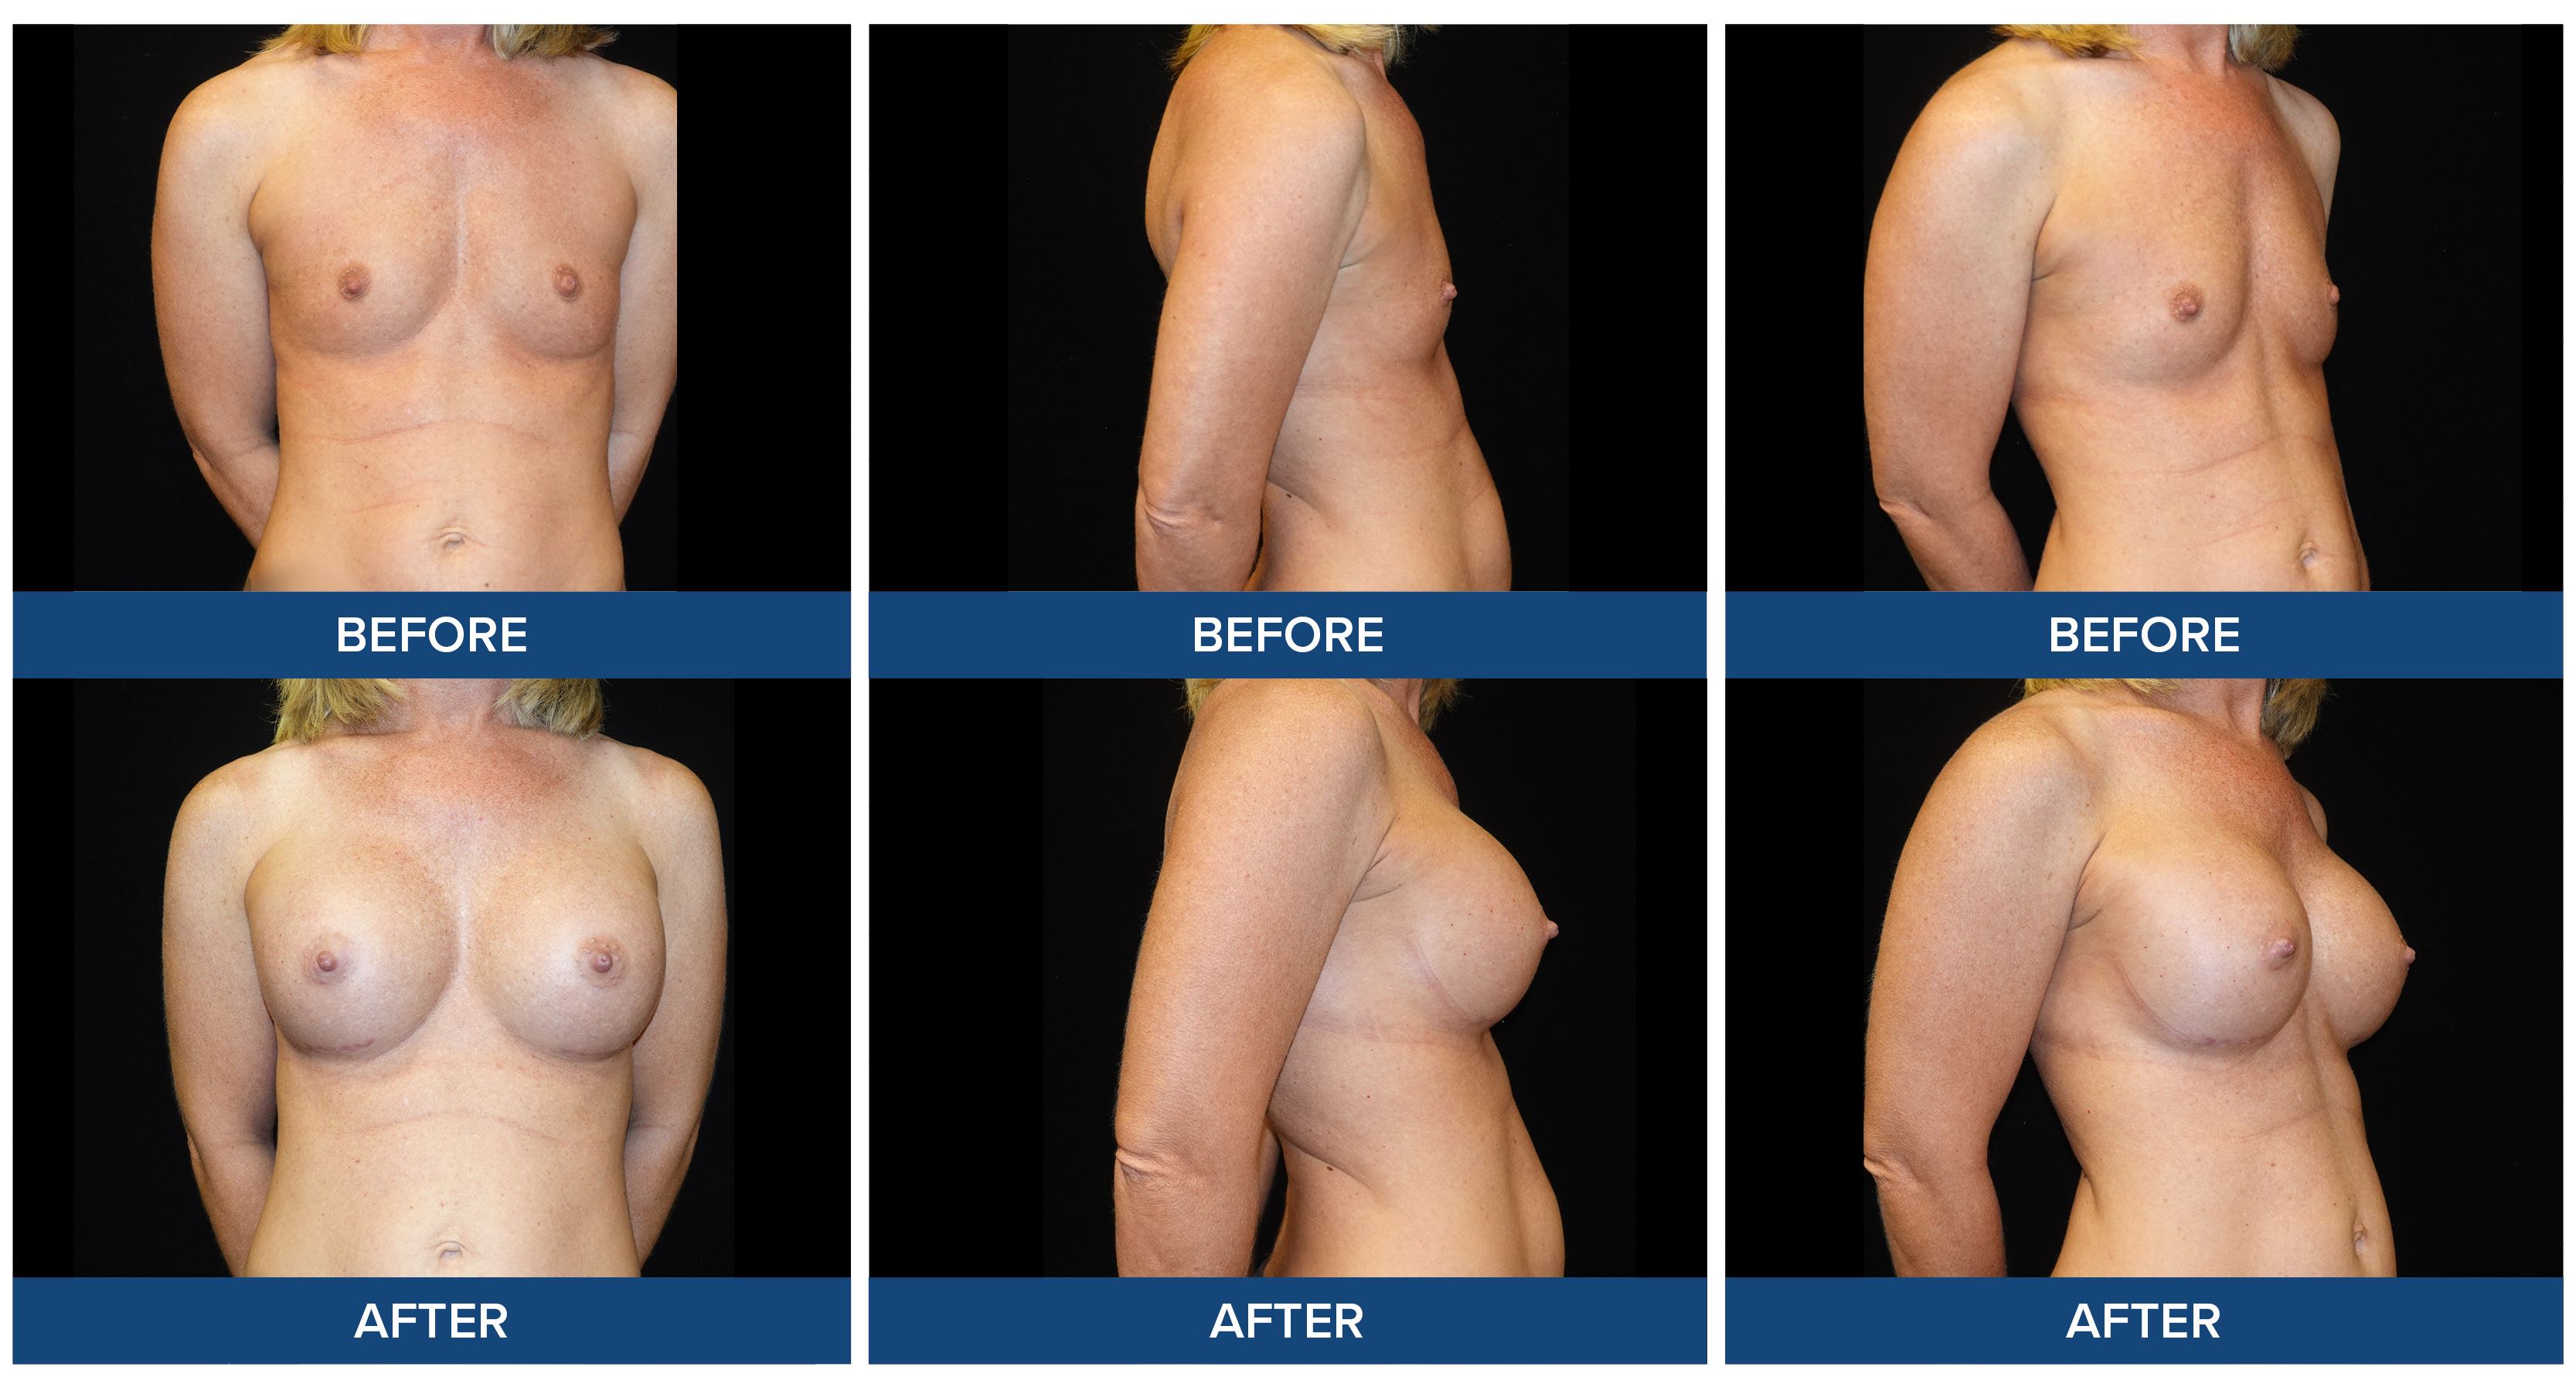 Female patient before and after photos of breast augmentation procedure.